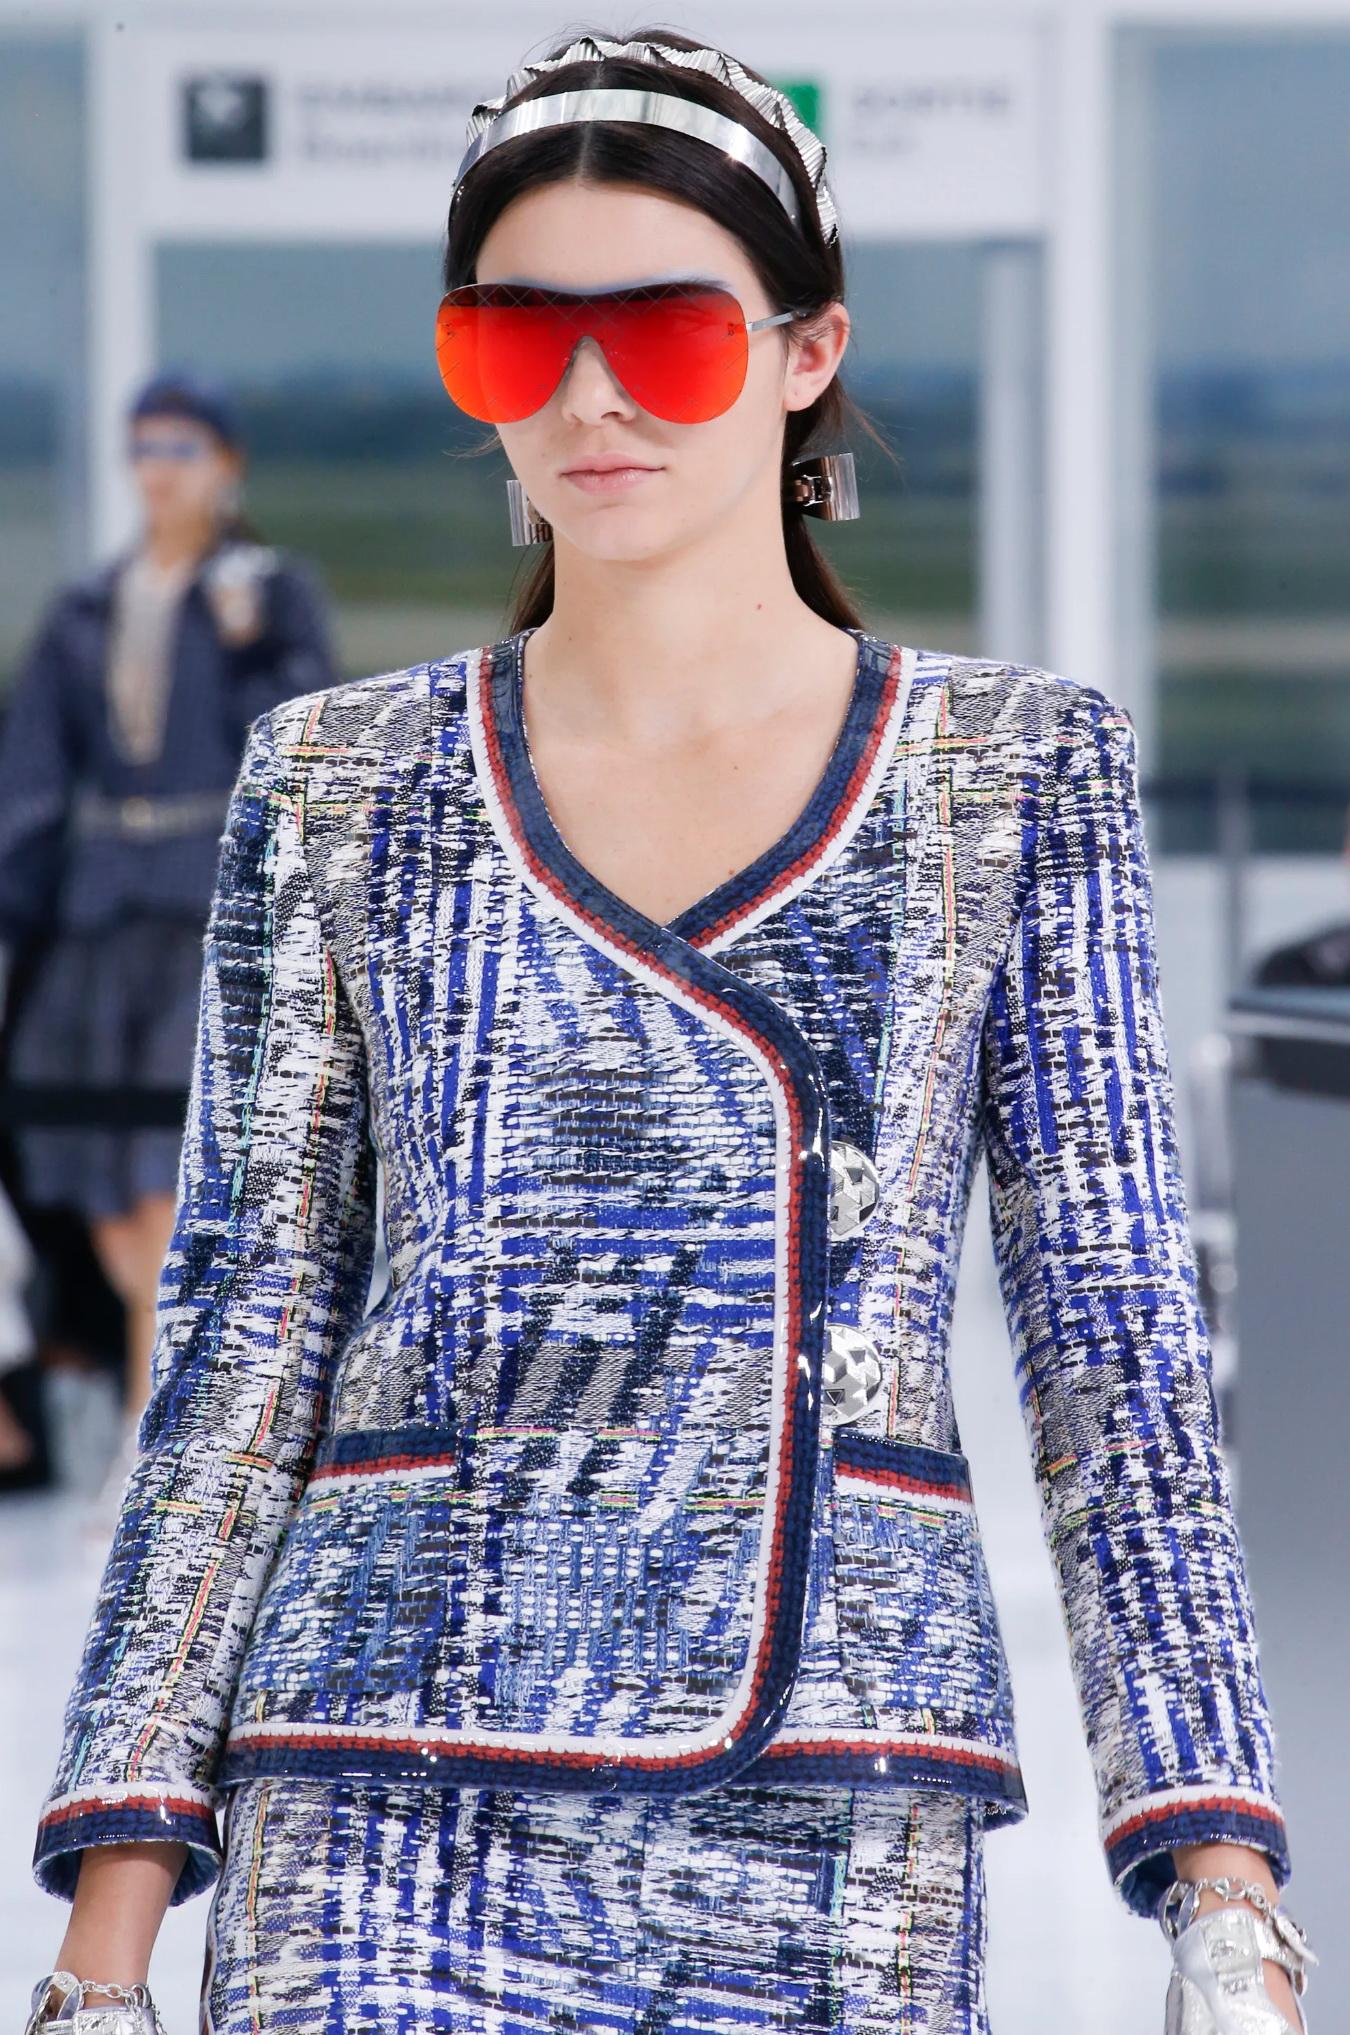 Women's New W/ Tags Chanel Spring 2016 Kendall Jenner 